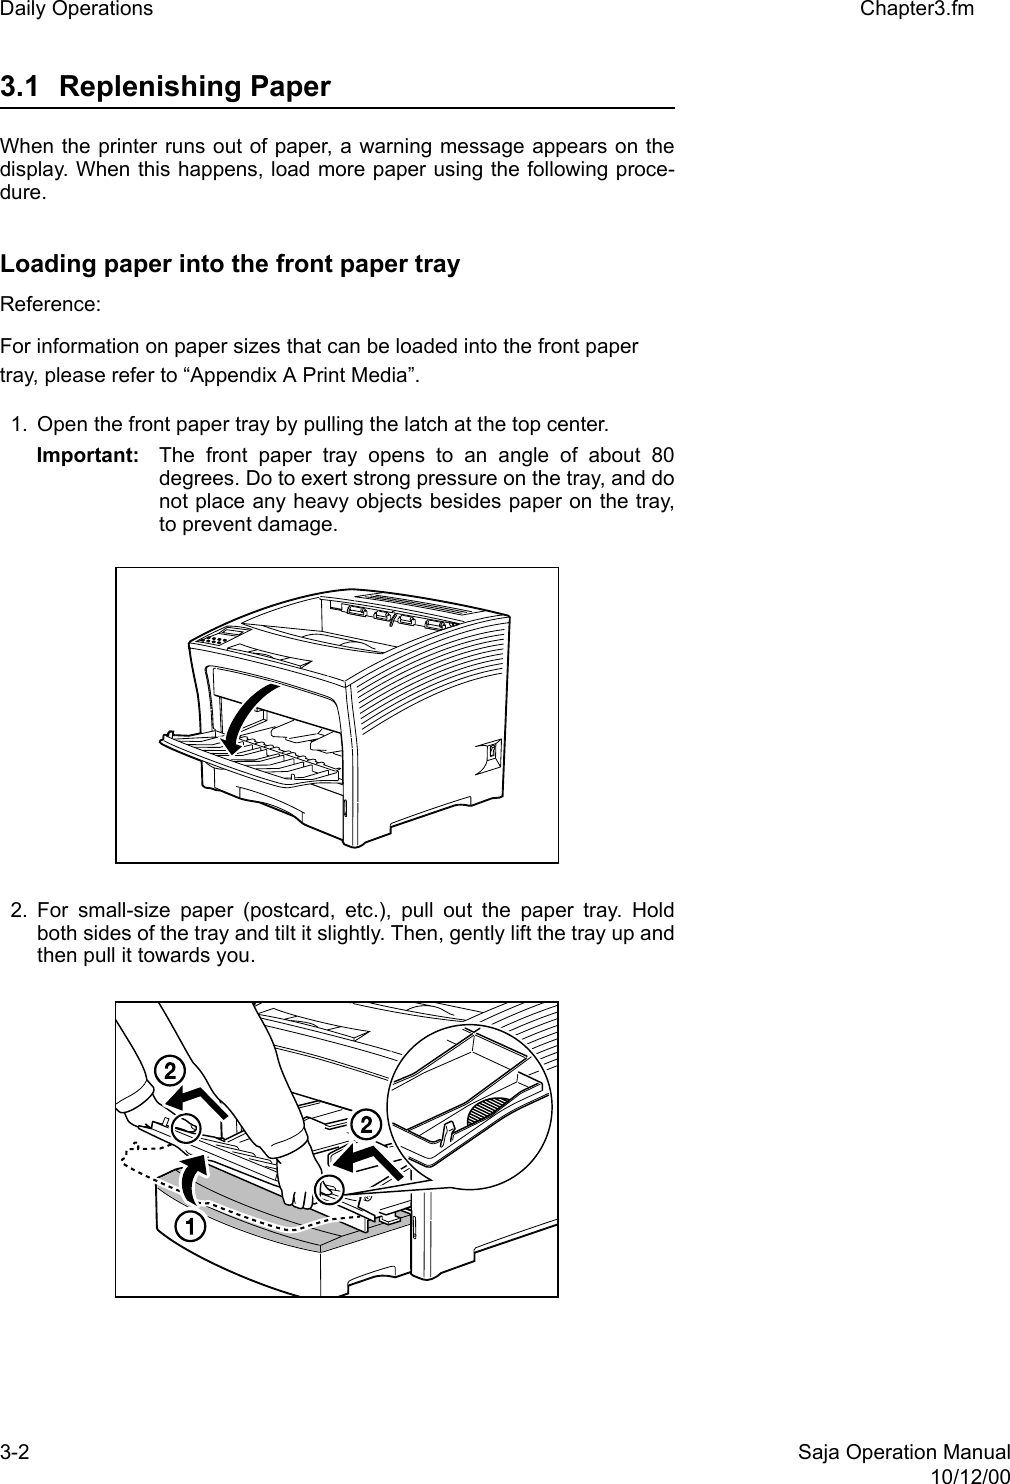 3-2 Saja Operation Manual10/12/00Daily Operations Chapter3.fm3.1 Replenishing Paper When the printer runs out of paper, a warning message appears on thedisplay. When this happens, load more paper using the following proce-dure.Loading paper into the front paper trayReference: For information on paper sizes that can be loaded into the front paper tray, please refer to “Appendix A Print Media”. 1. Open the front paper tray by pulling the latch at the top center. Important: The front paper tray opens to an angle of about 80degrees. Do to exert strong pressure on the tray, and donot place any heavy objects besides paper on the tray,to prevent damage. 2. For small-size paper (postcard, etc.), pull out the paper tray. Holdboth sides of the tray and tilt it slightly. Then, gently lift the tray up andthen pull it towards you.